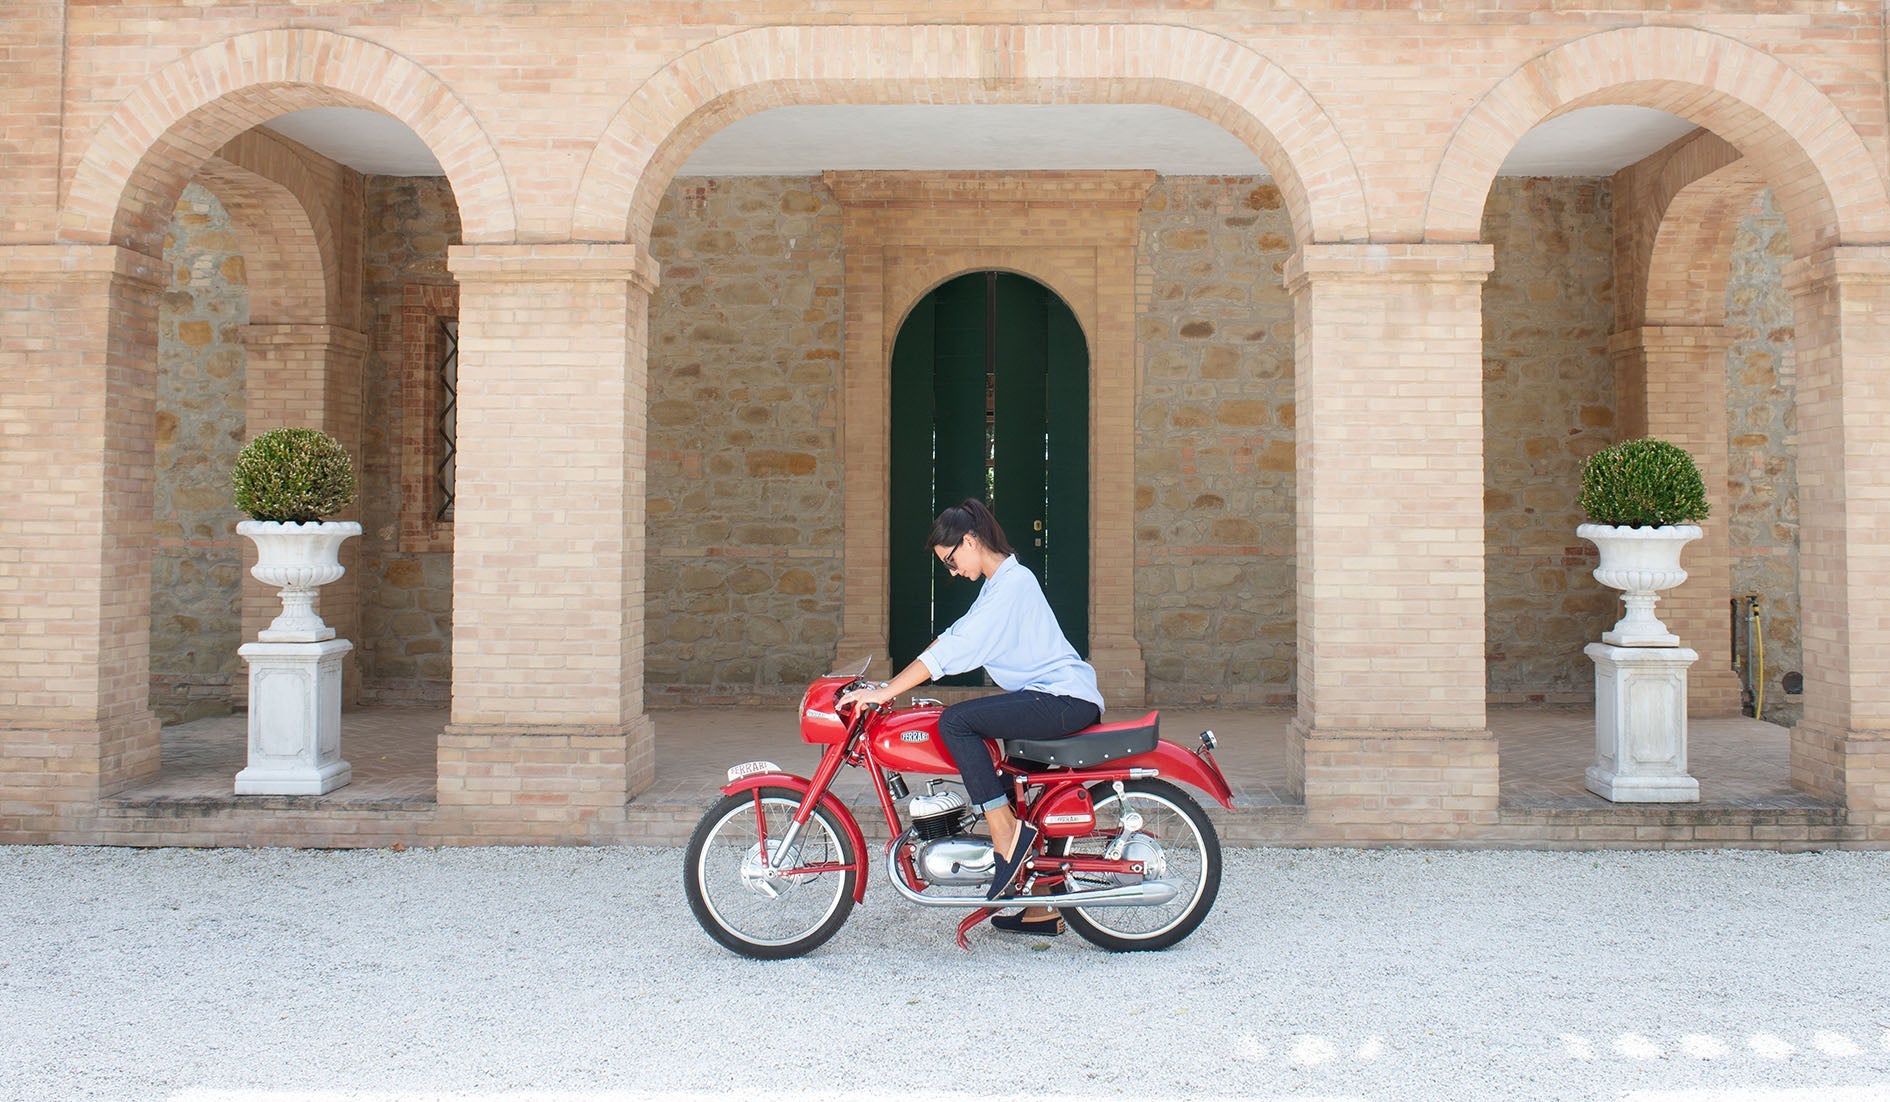 Luxury Denim Jeans handcrafted and made in Italy from Selvedge denim, woman sitting on antique red Ferrari motorcycle in front of Italian Villa